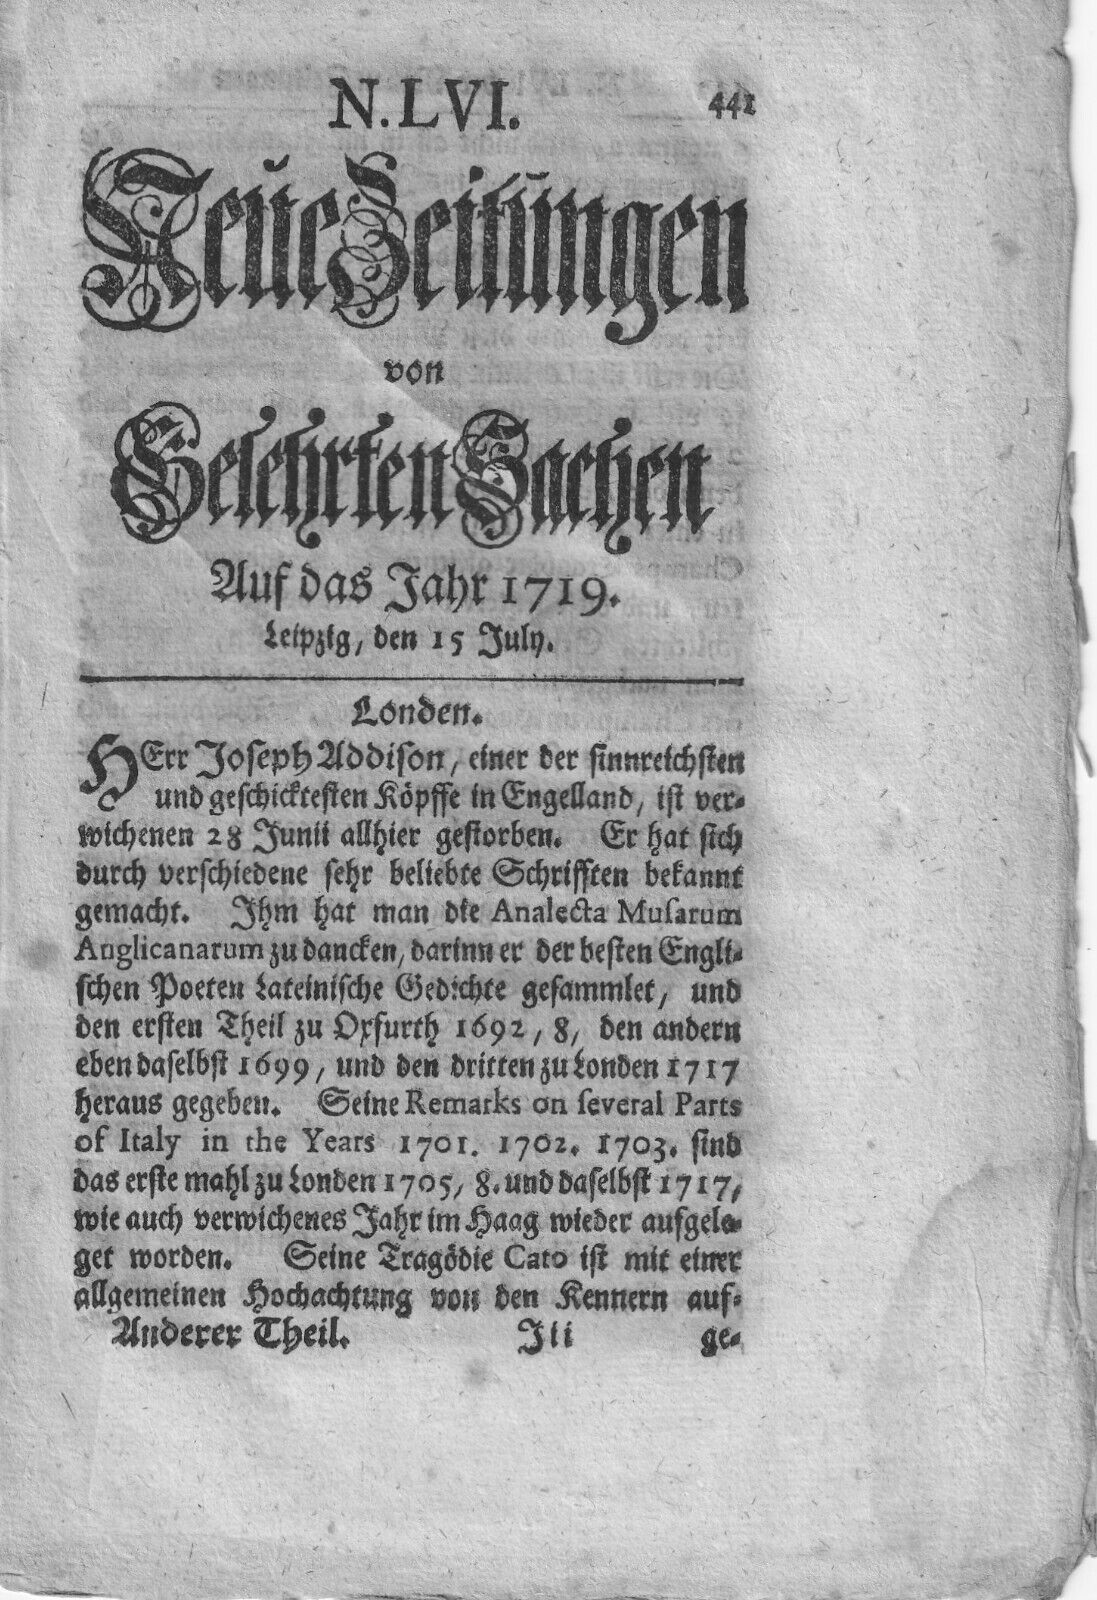 Very Old and Rare Leipzig, Germany  Newspaper dated July 15, 1719